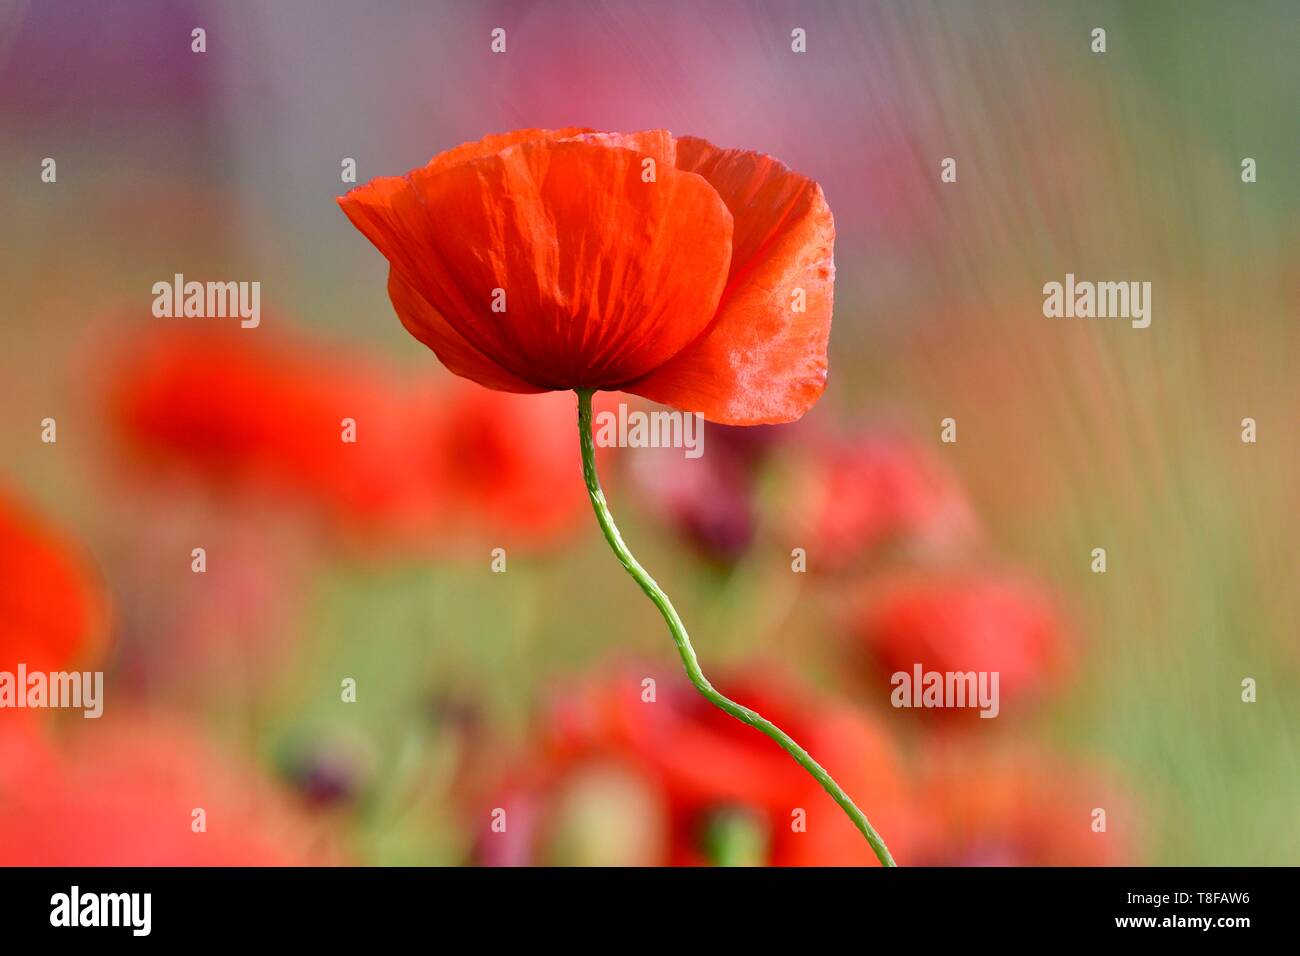 France, Lozere, Causse Mejean, flora, poppies Stock Photo